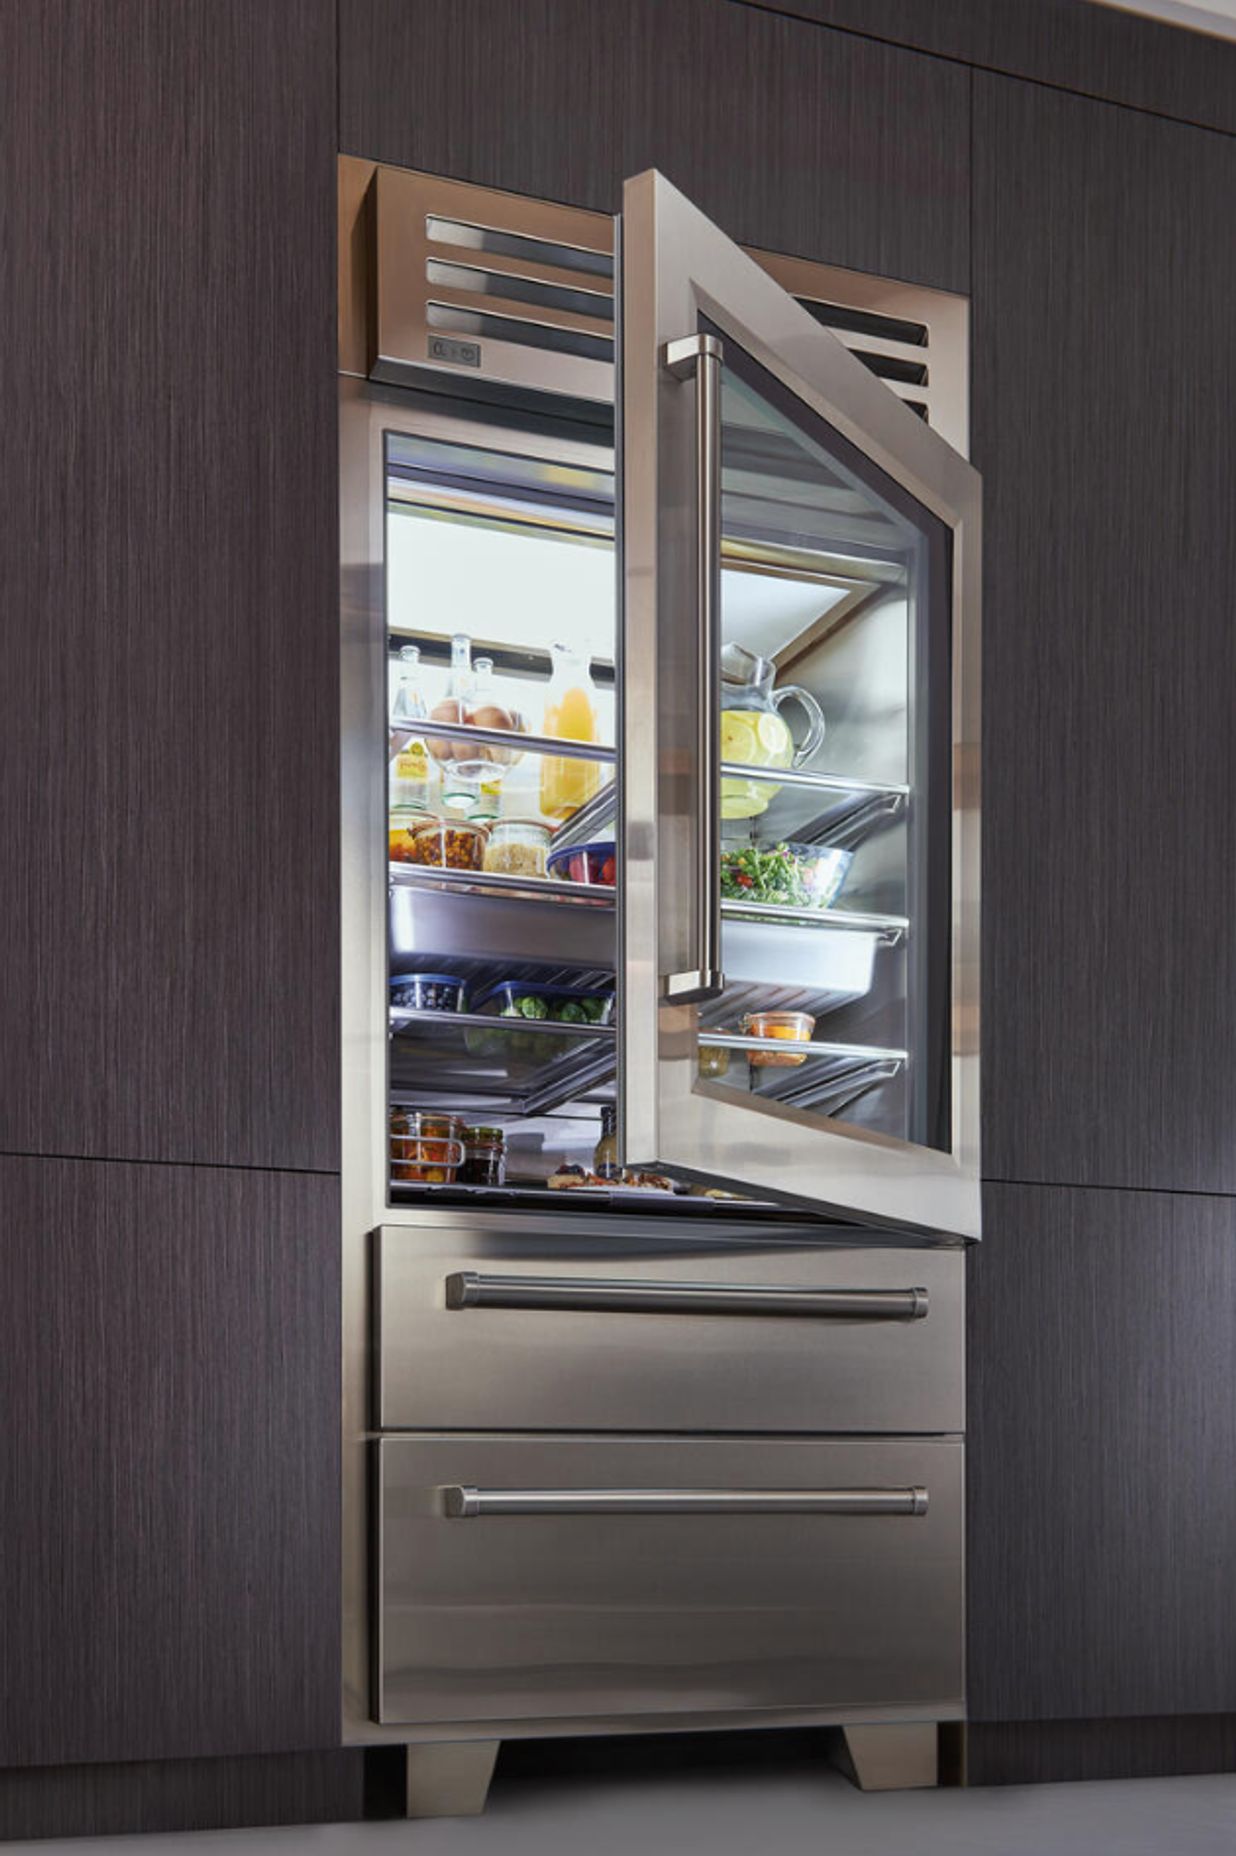 A separate compressor and evaporator system means vegetables won't wilt in this glass-fronted SubZero fridge.